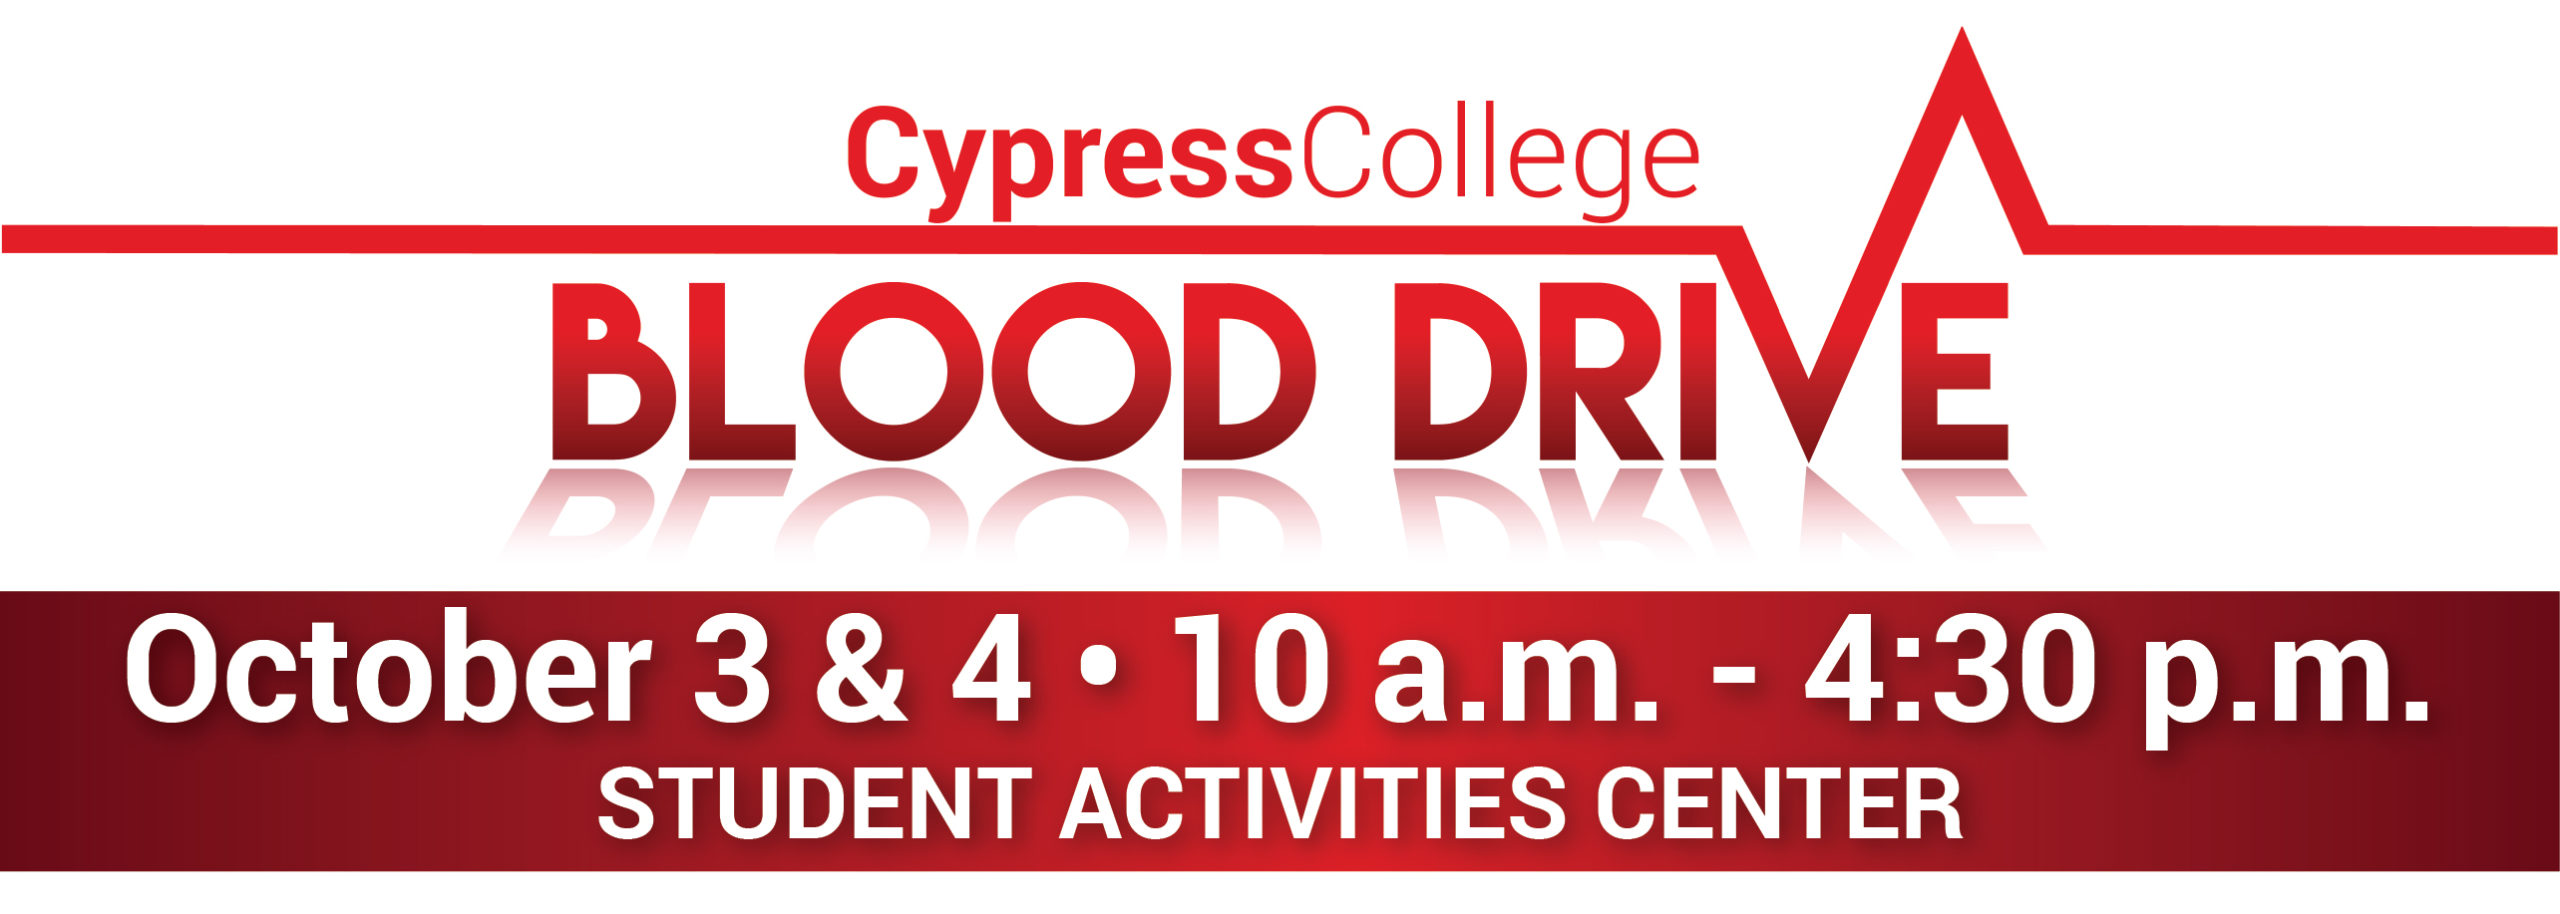 Cypress College Blood Drive flyer.